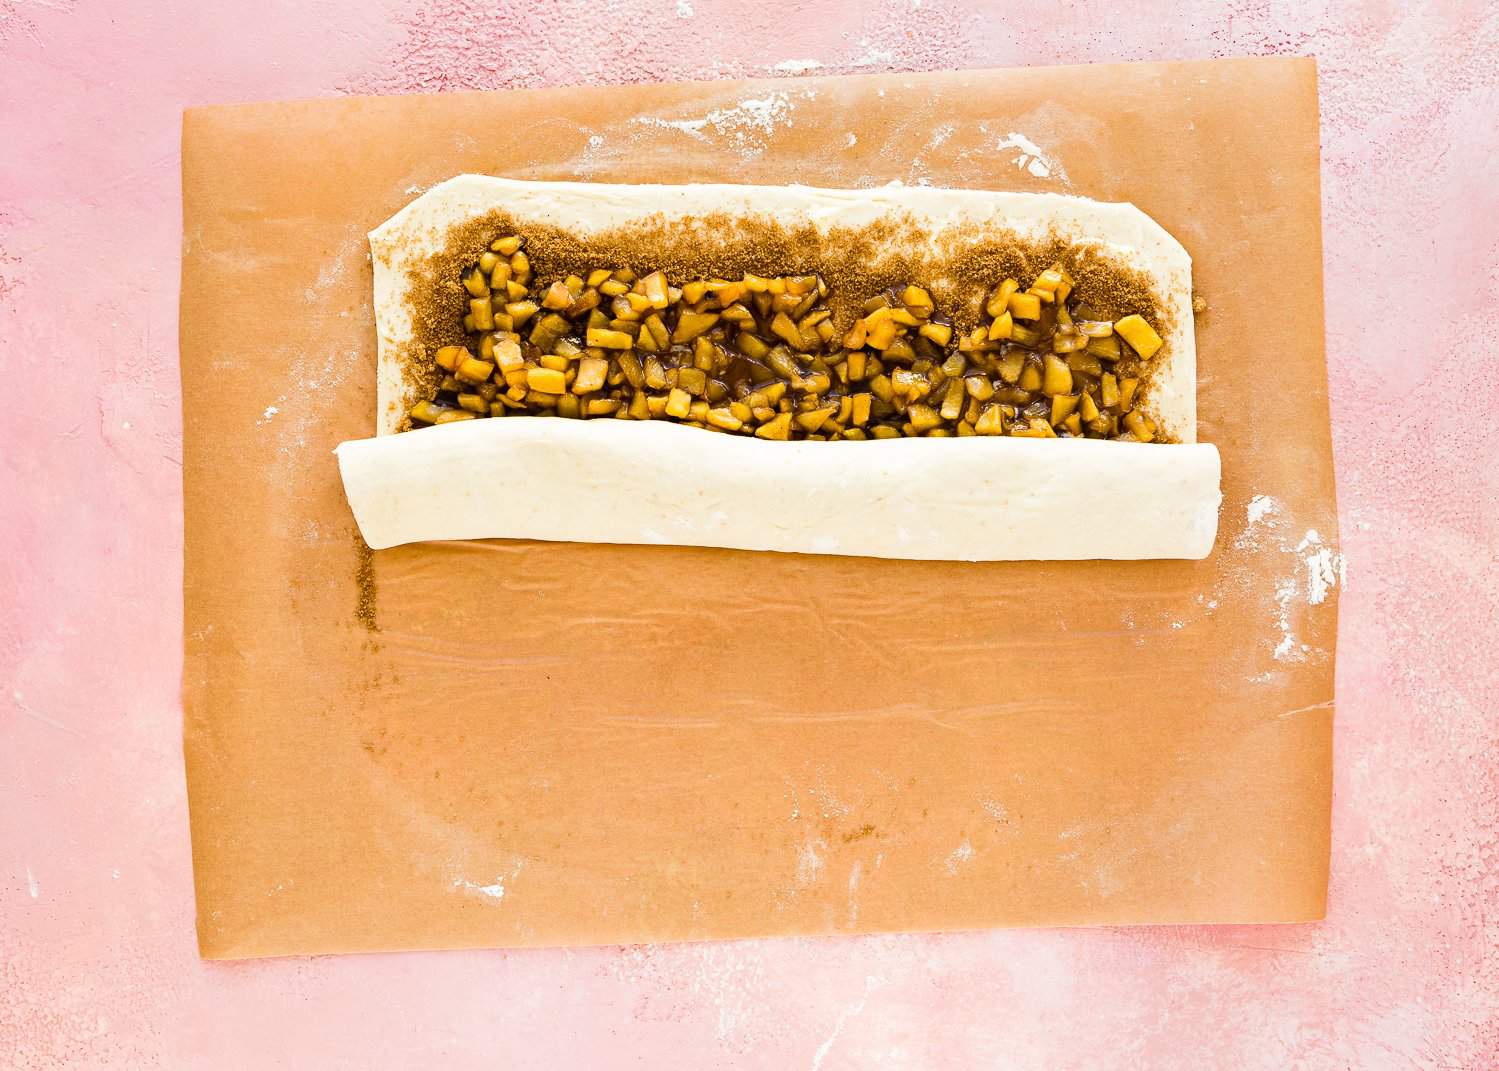 egg-freedough rolled into a rectangle with butter and cinnamon sugar on top over parchment paper being rolled into a log.